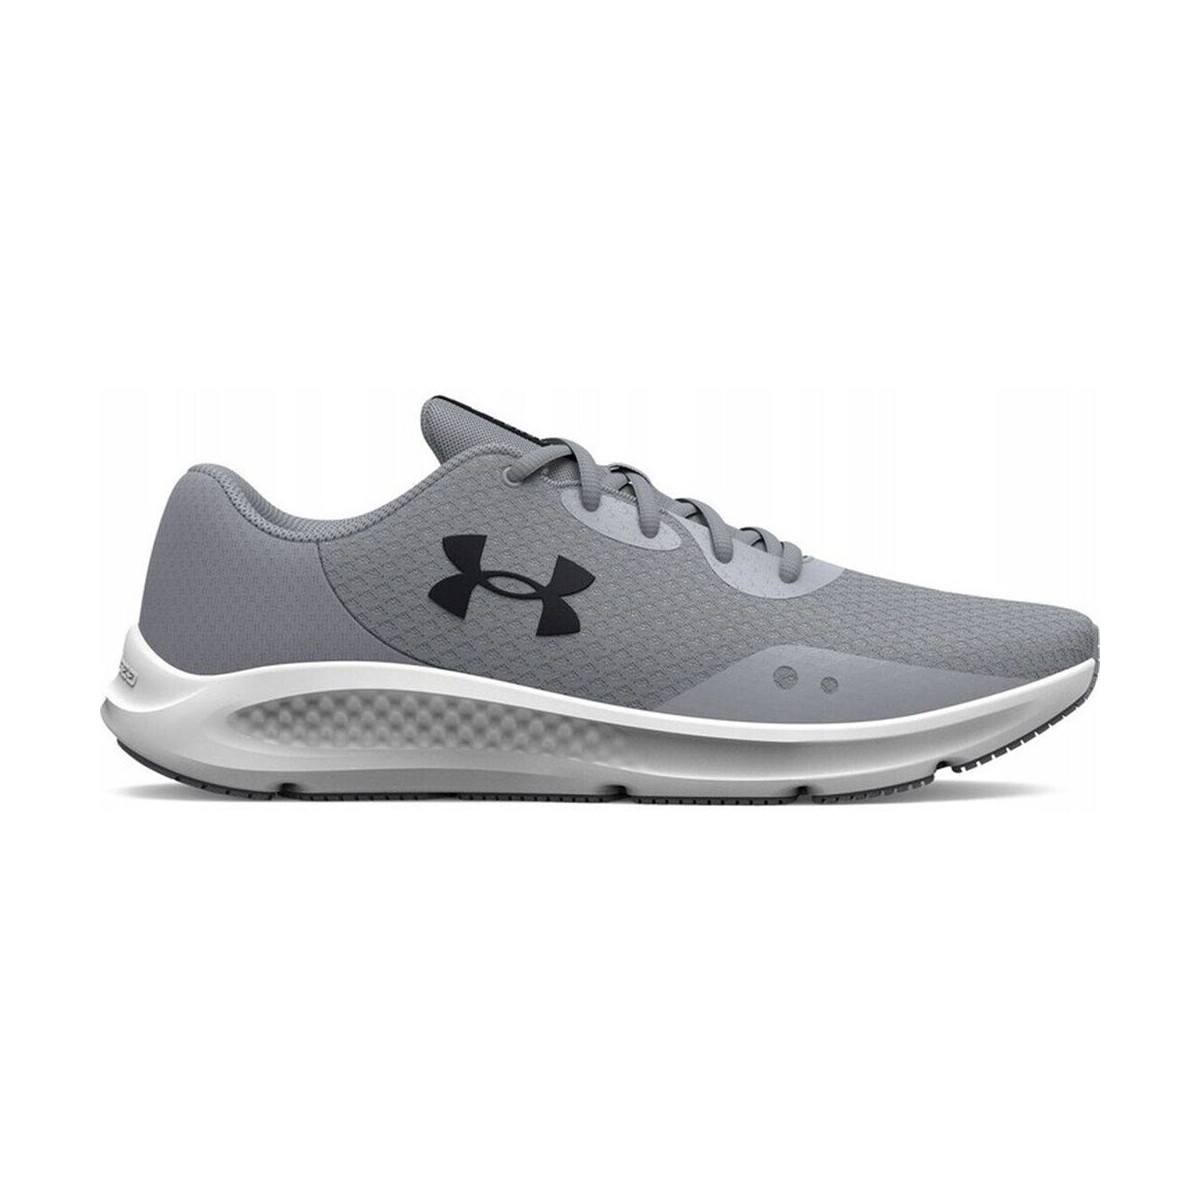 Under Armour Charged 3 Pursuit Grey